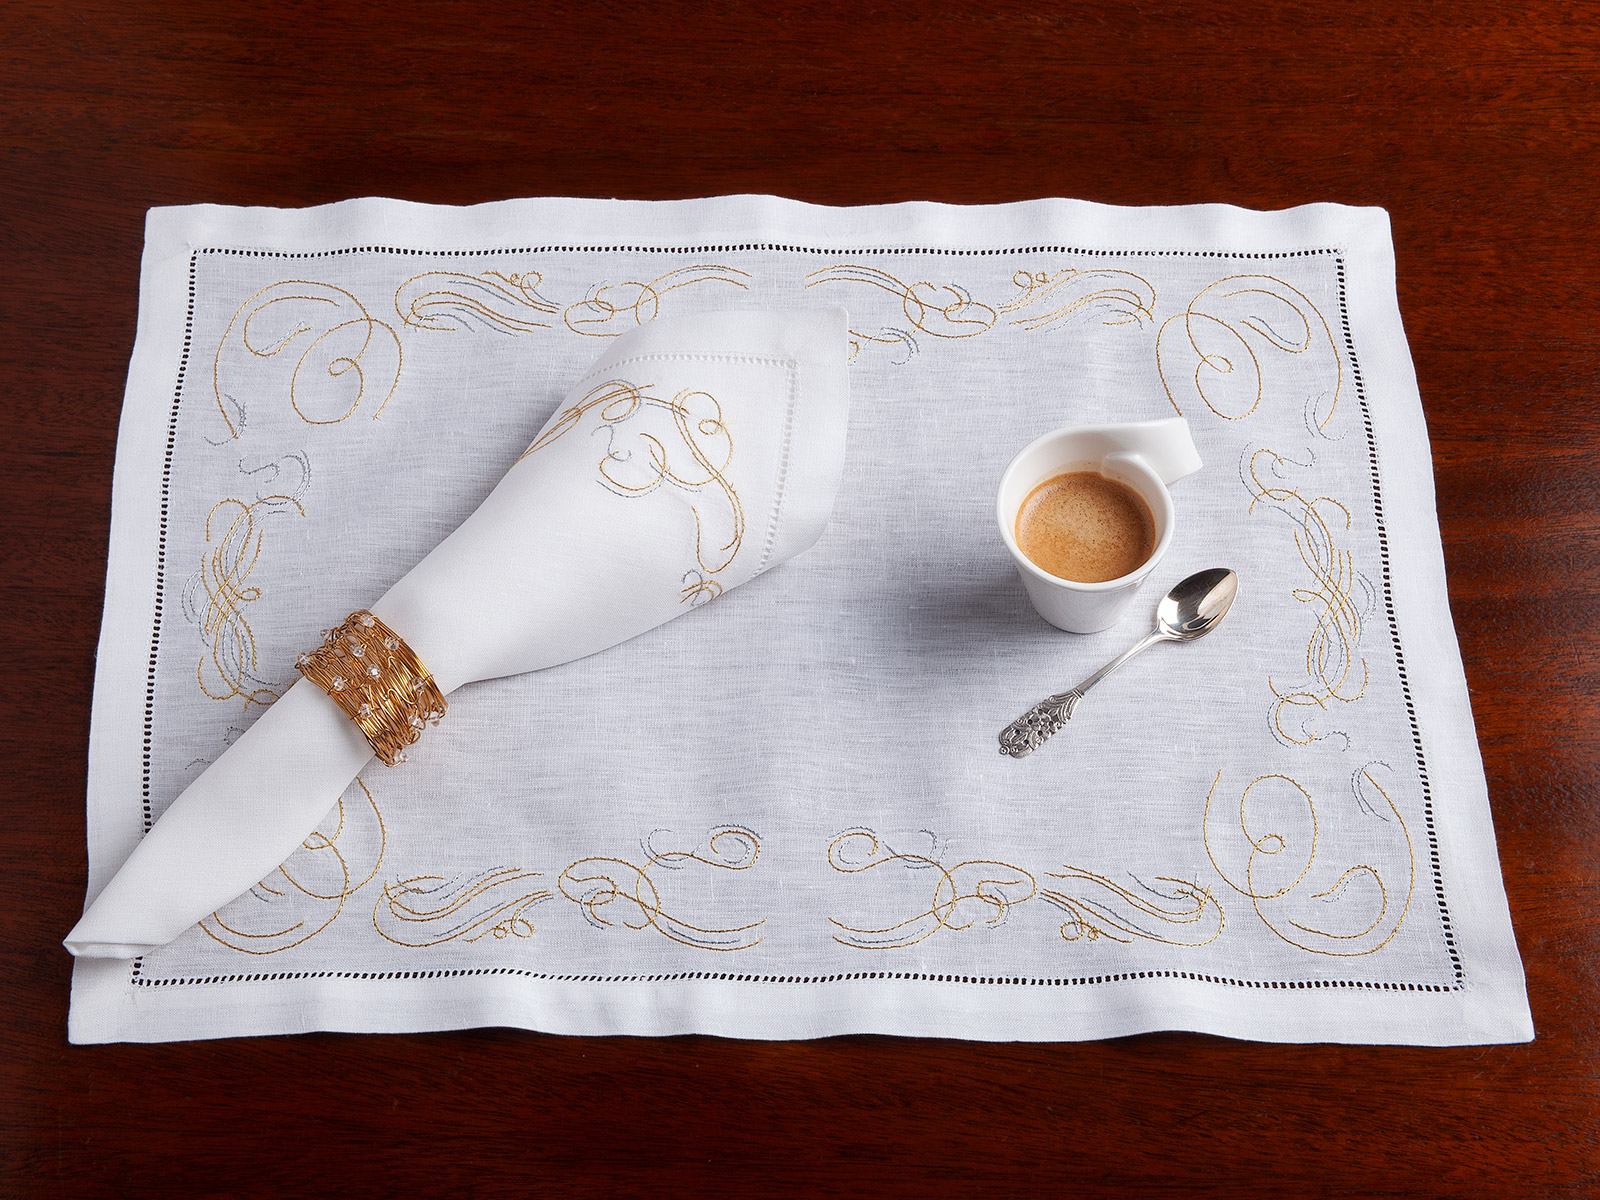 Etchings Placemat & Napkins Set: Gold & Silver Embroidery